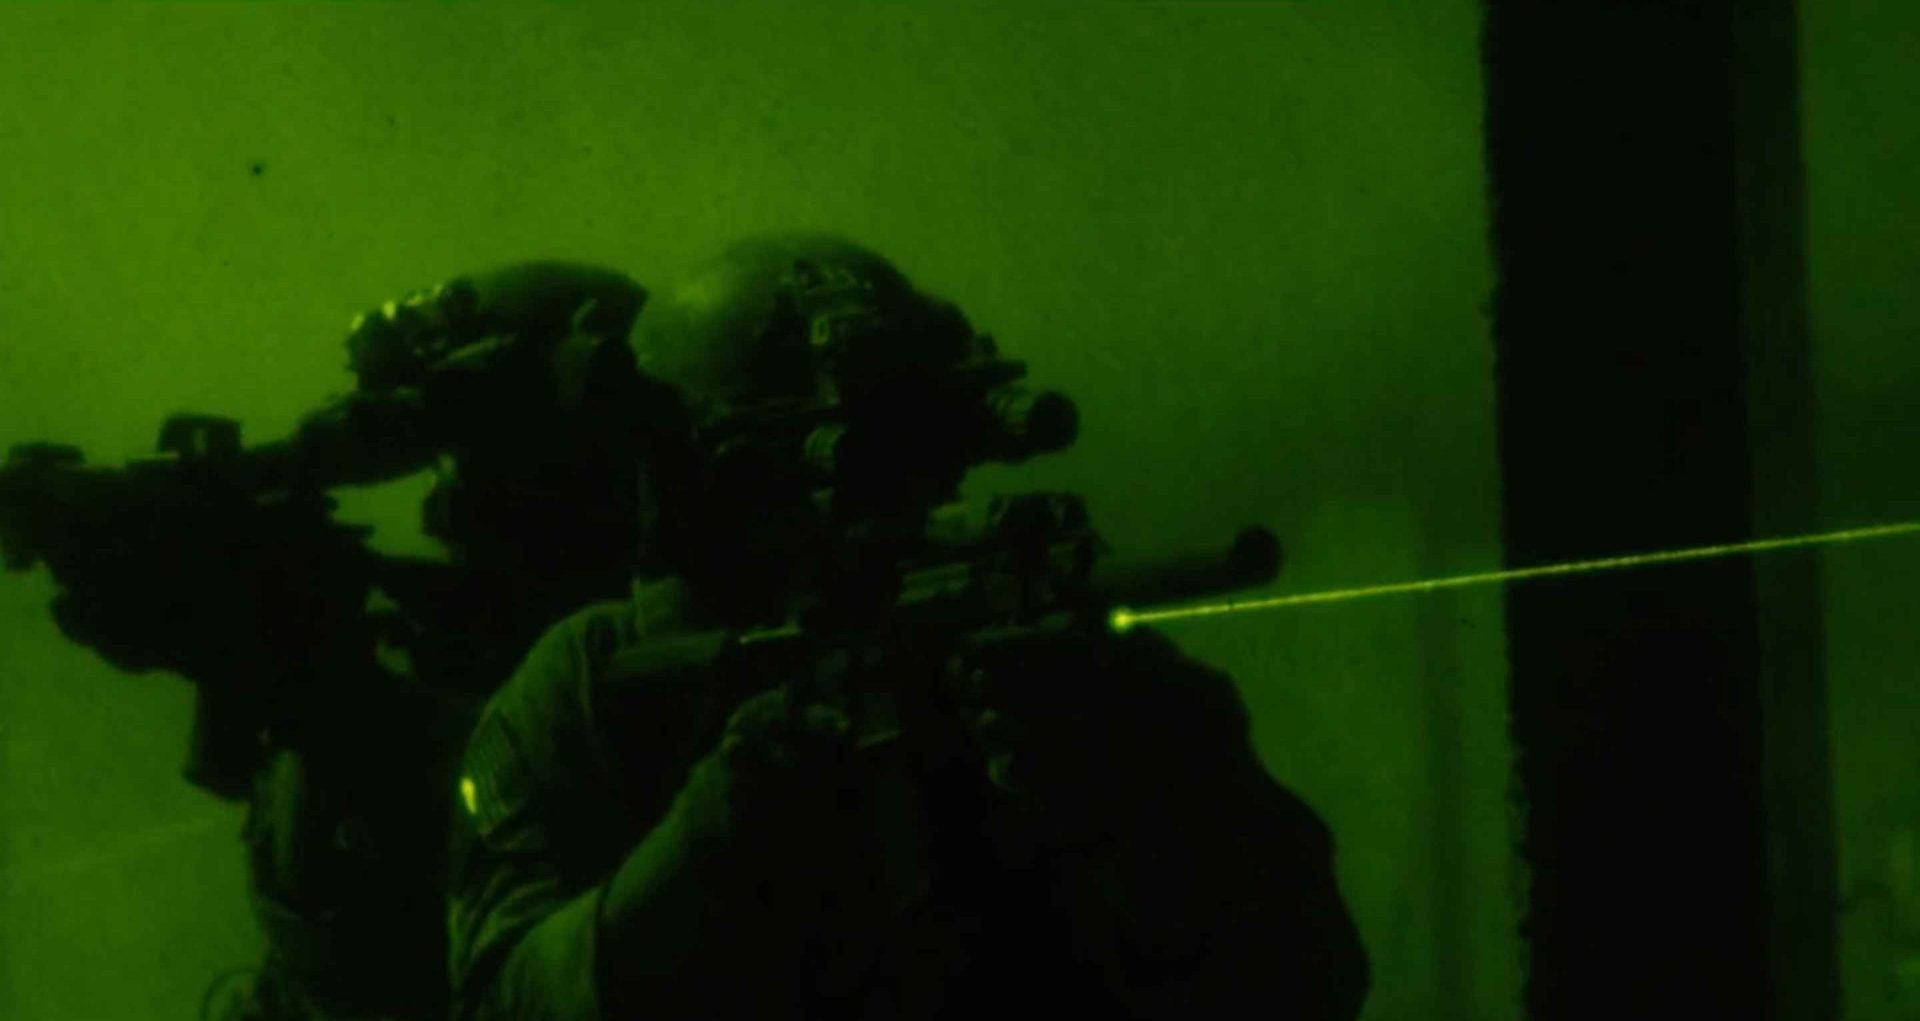 Zero Dark Thirty 2012 Soldiers using night vision goggles and lasers